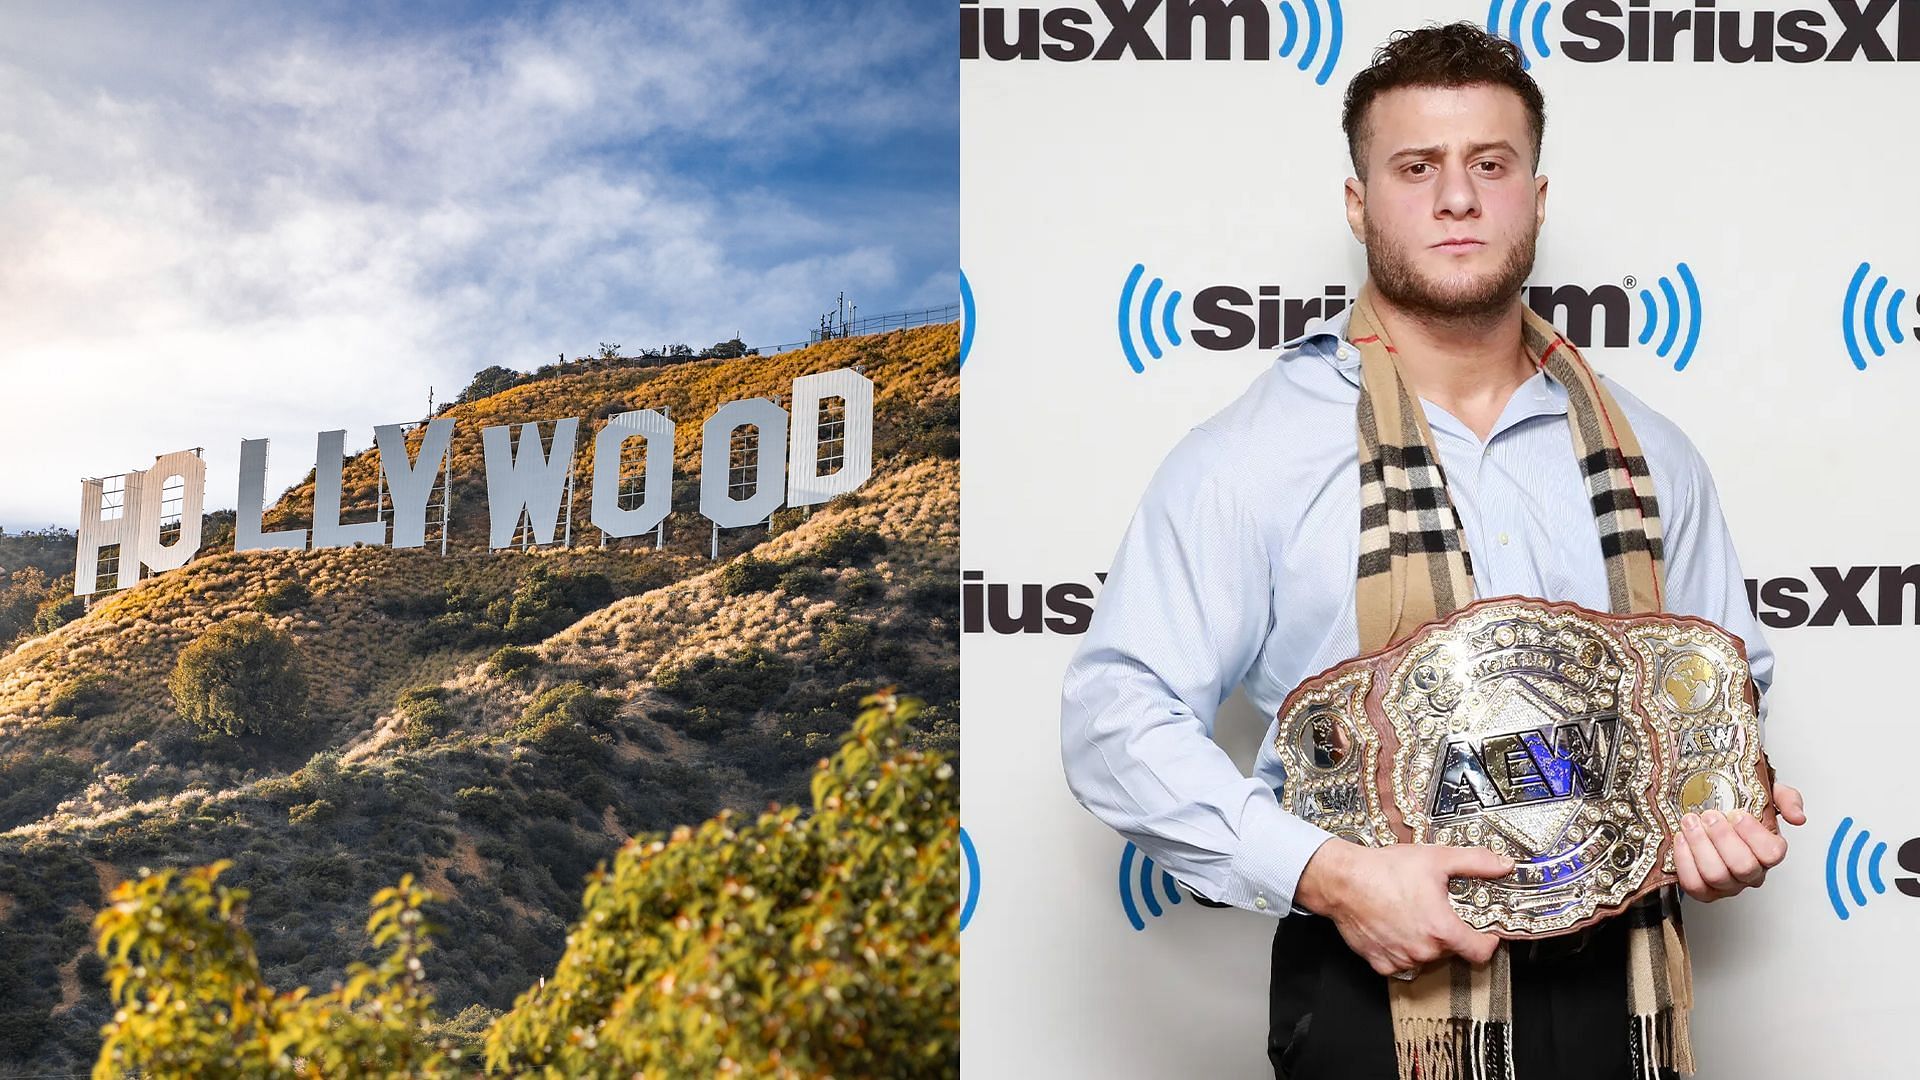 The AEW World Champion is making moves in Hollywood